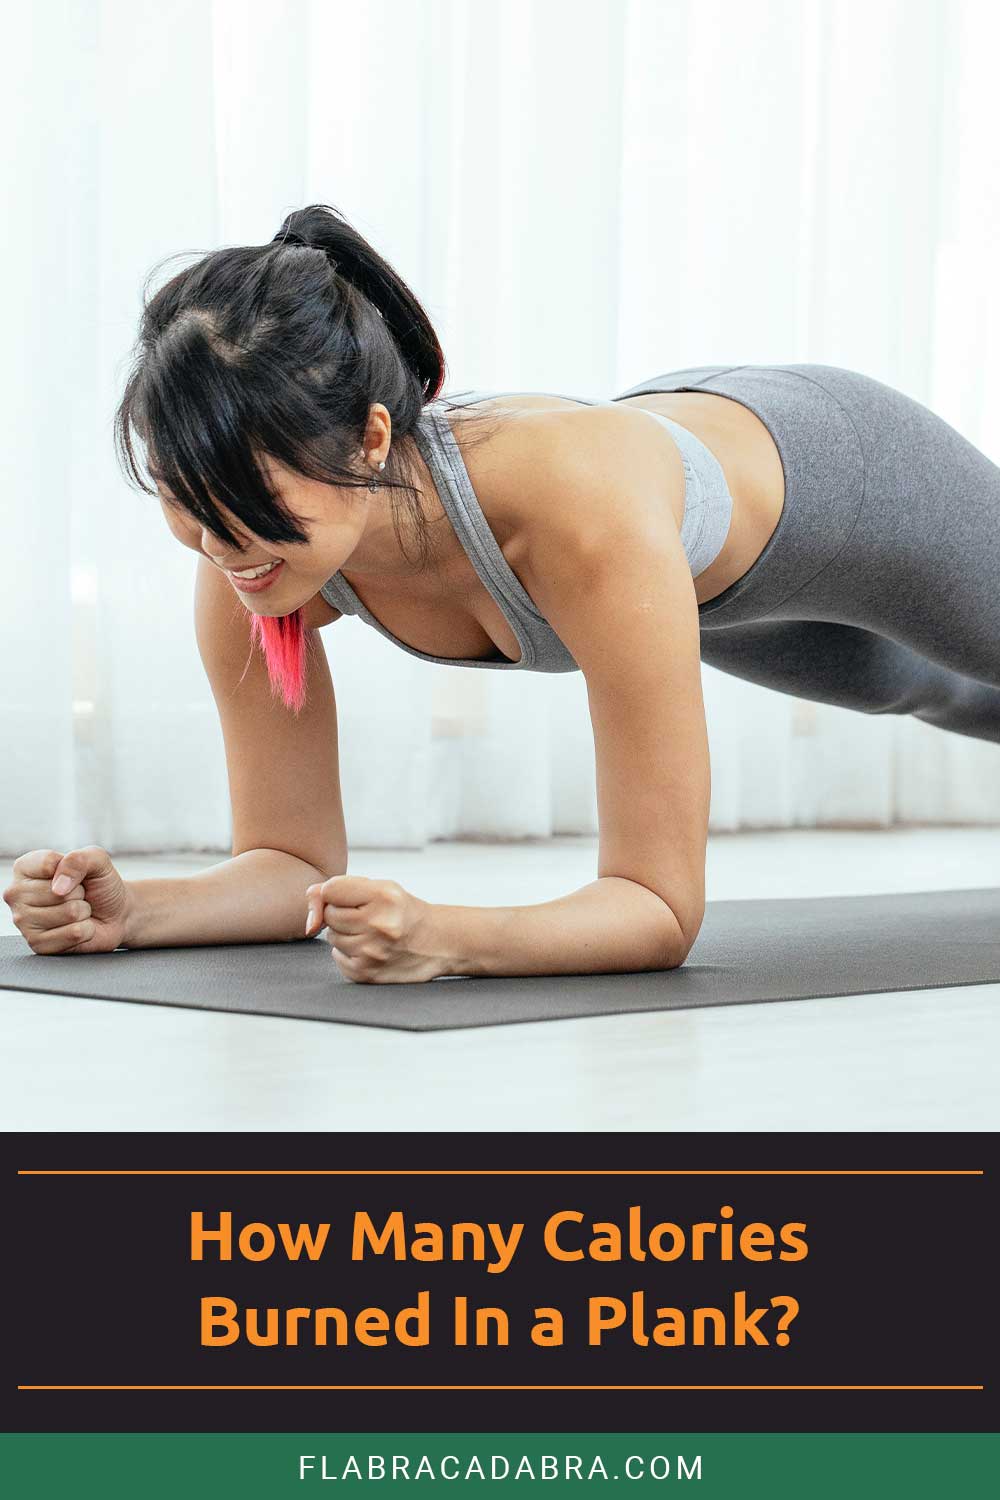 Woman doing plank on a grey yoga mat - How Many Calories does doing it burn?